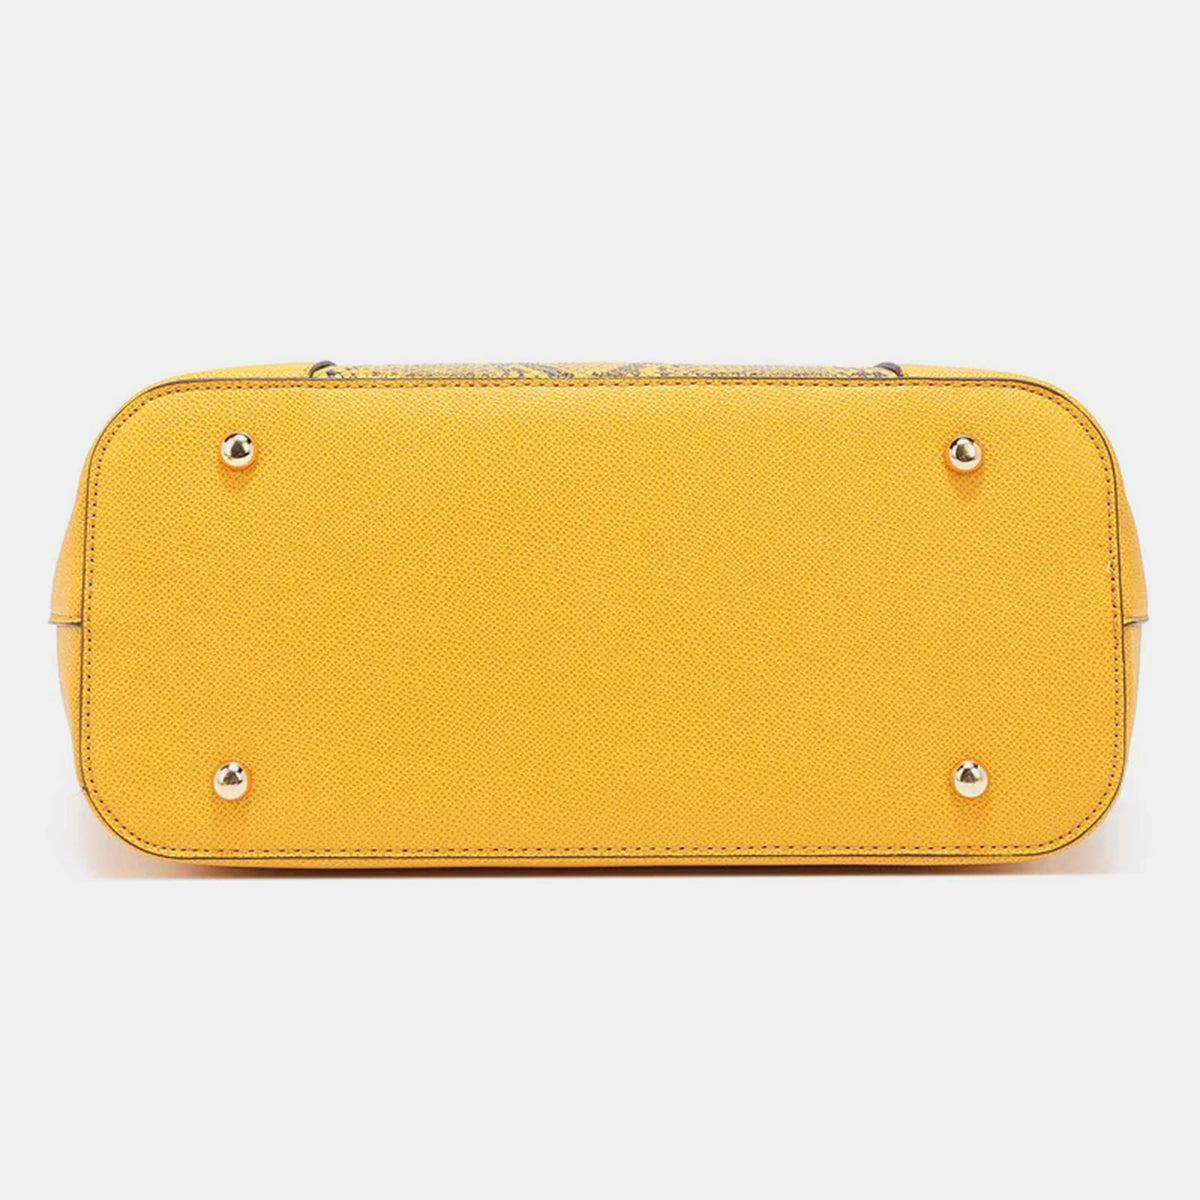 a yellow purse with rivets on the front